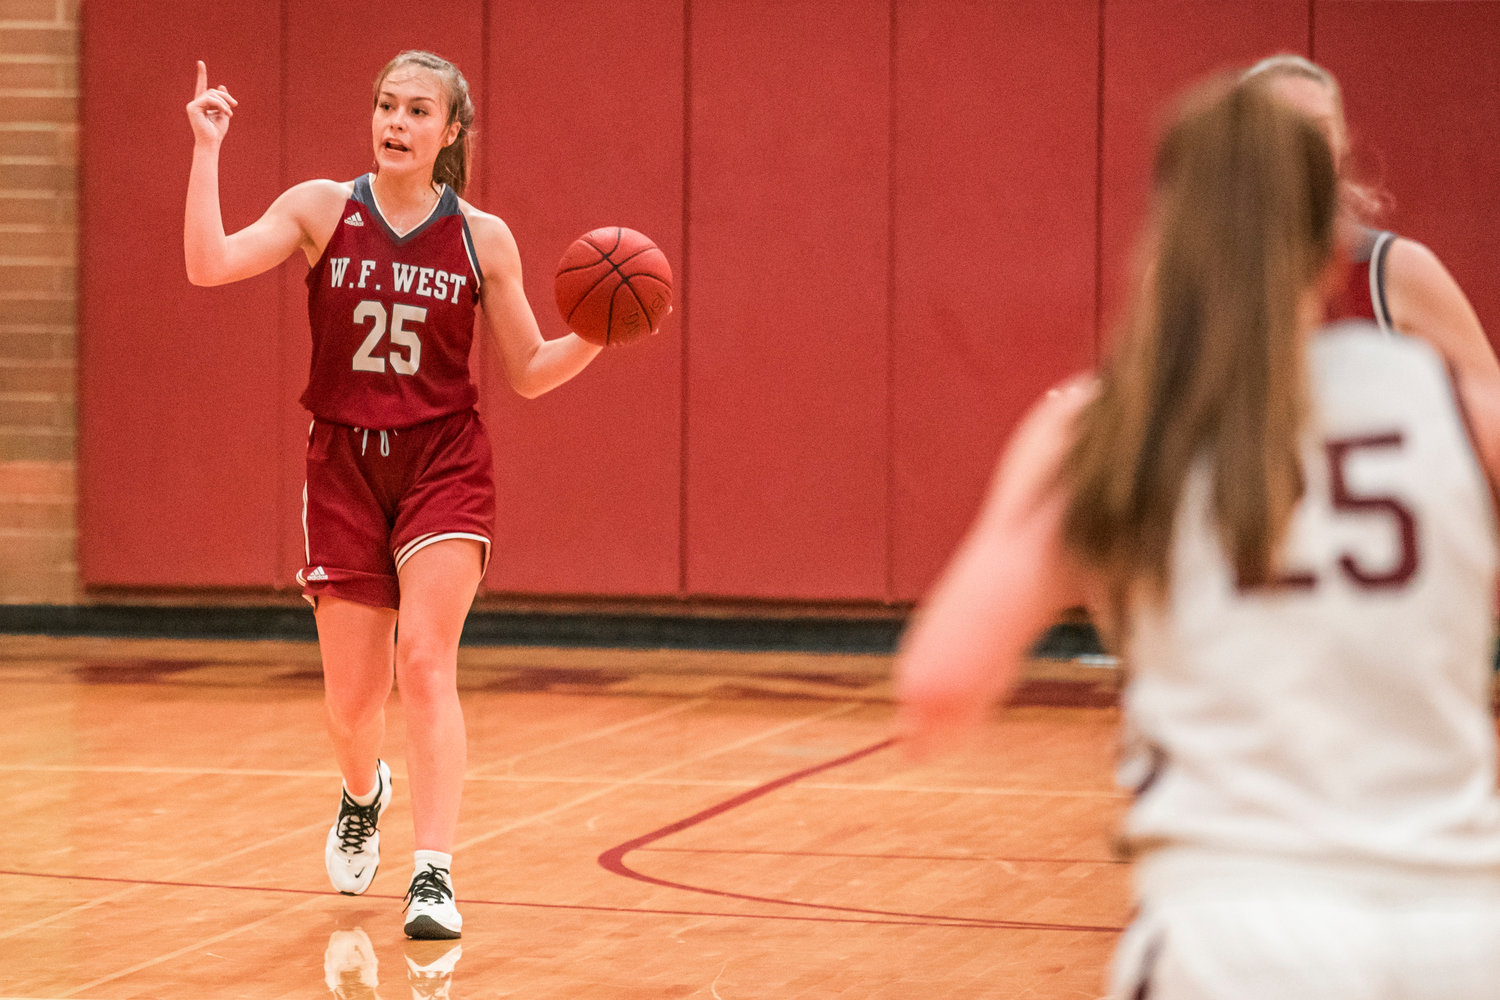 W.F. West’s Kyla McCallum (25) takes the ball up court during a game against Montesano Tuesday night.